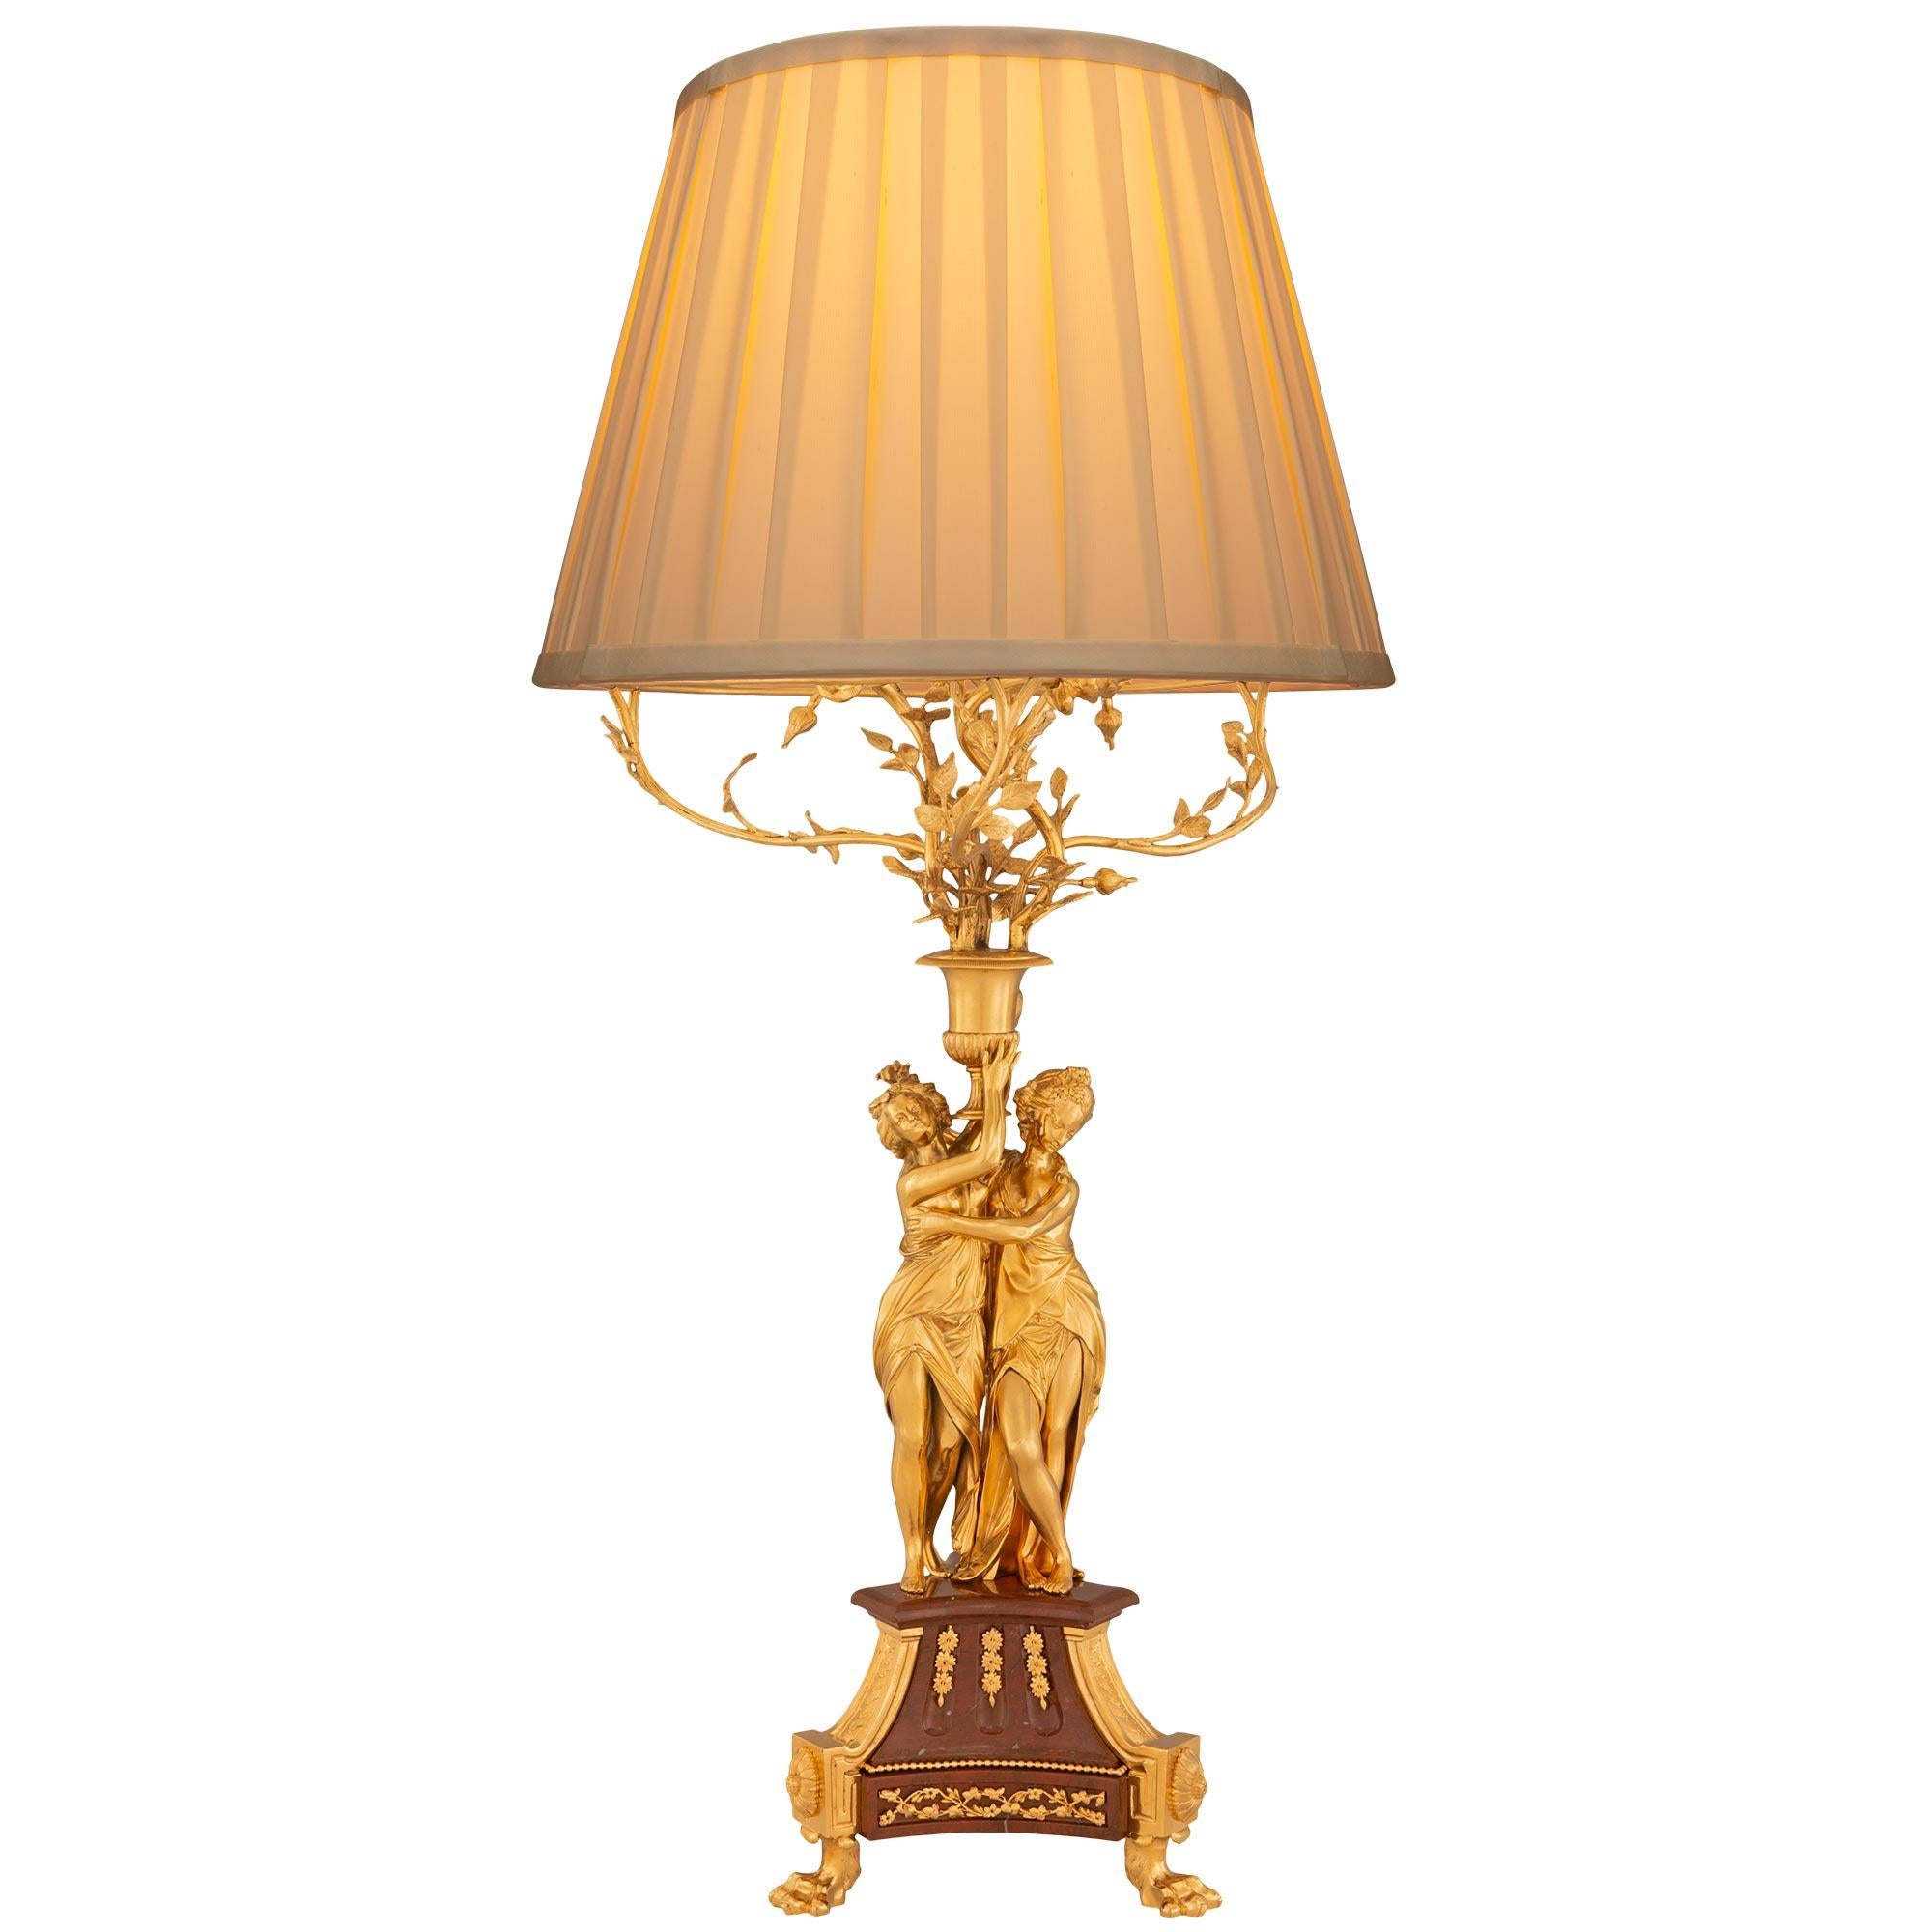 French 19th Century Belle Époque Period Ormolu And Rouge Griotte Marble Lamp For Sale 6